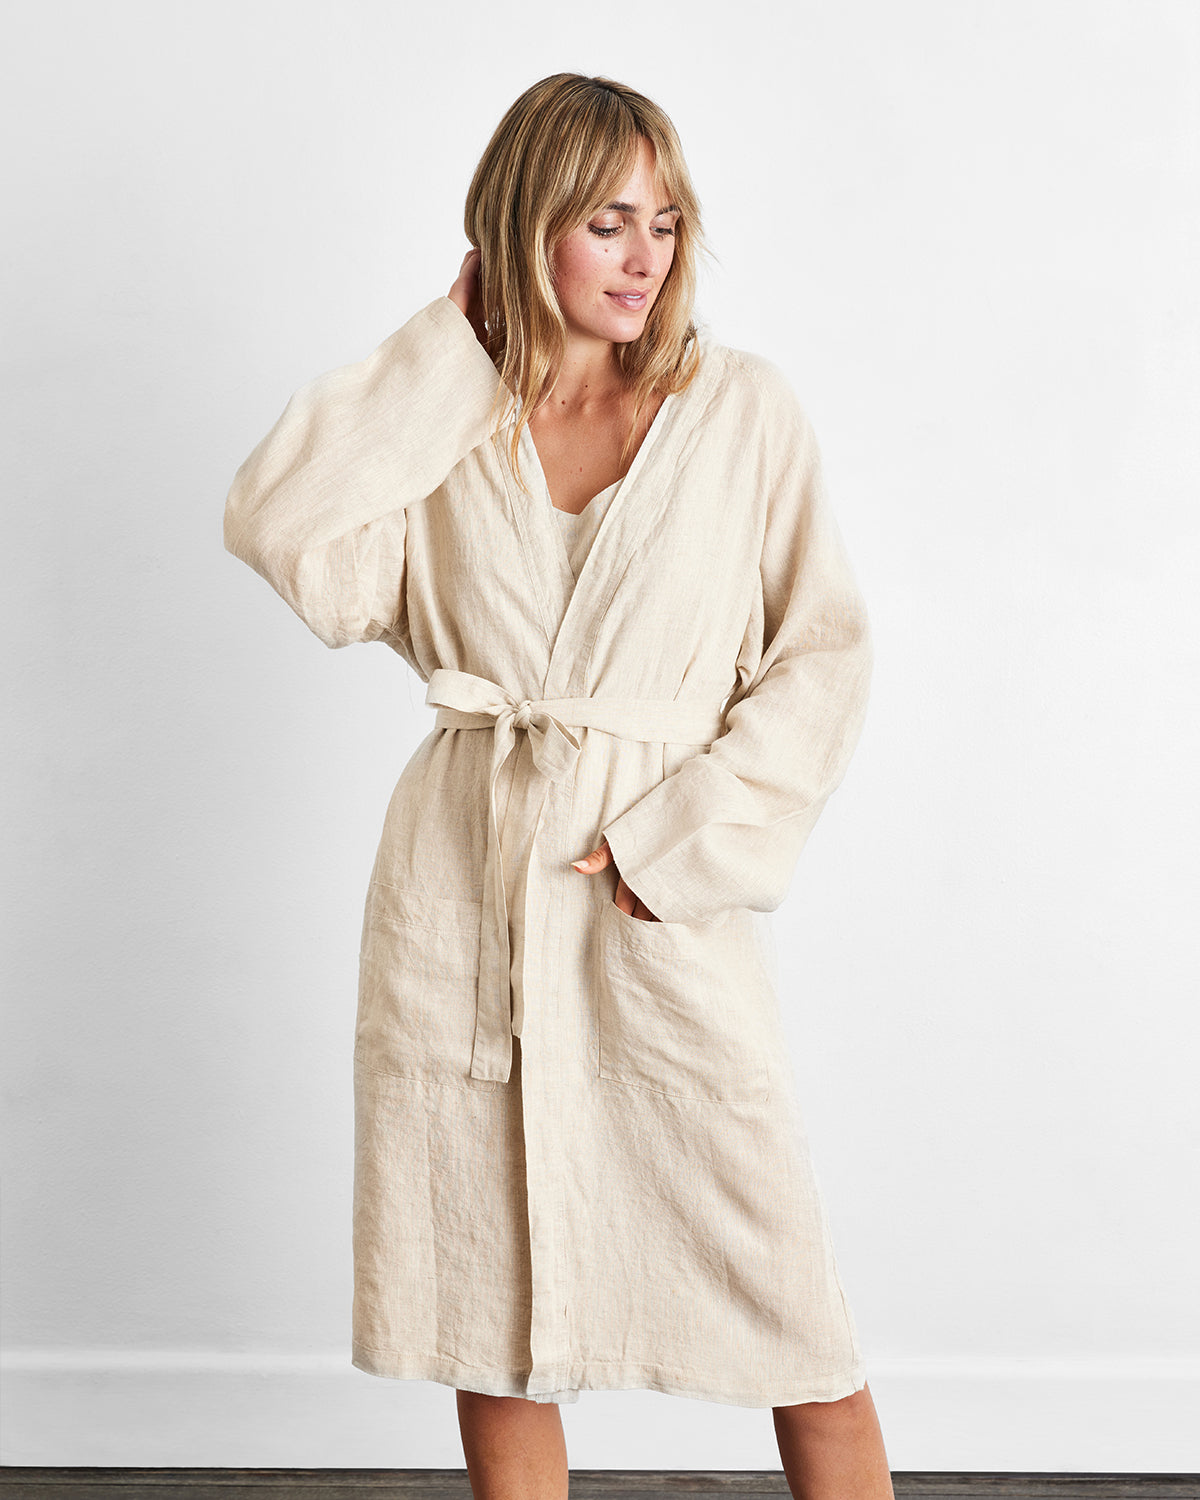 Oatmeal 100% French Flax Linen Classic Robe